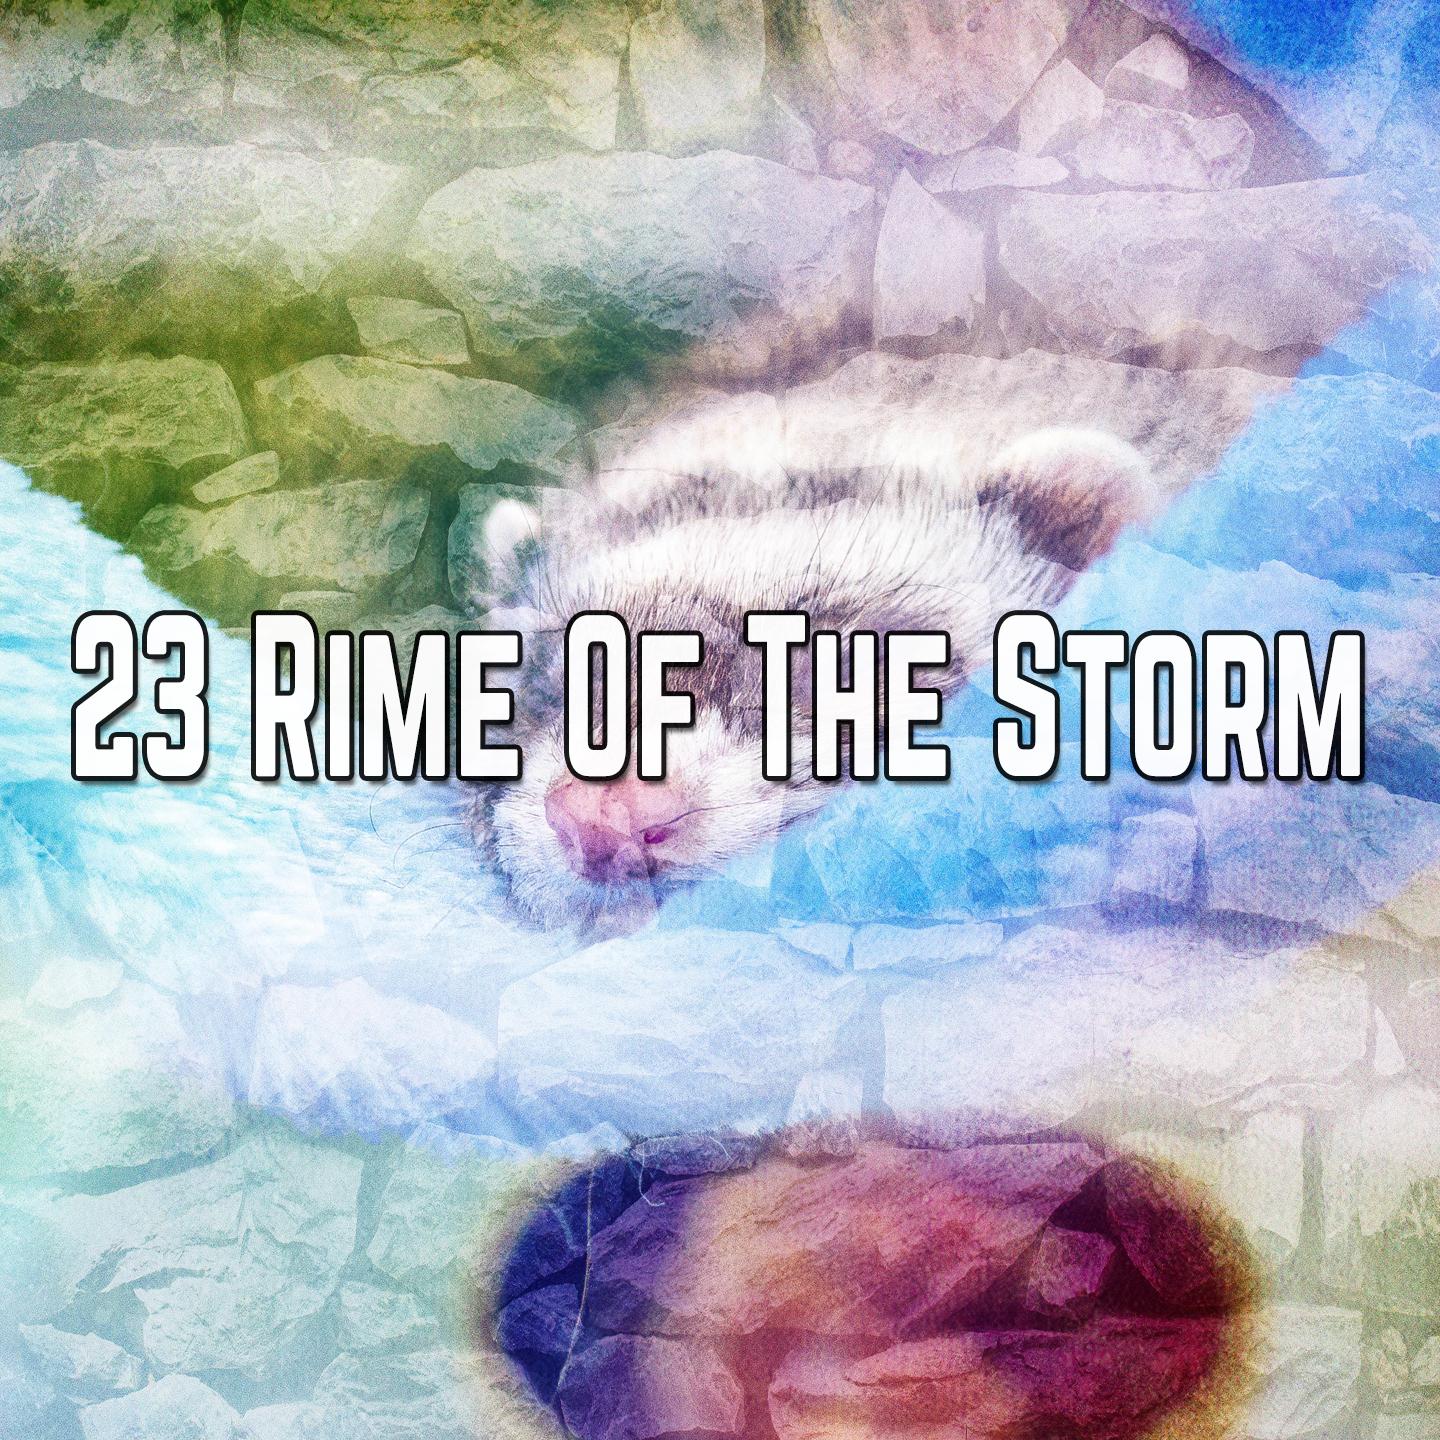 23 Rime of the Storm